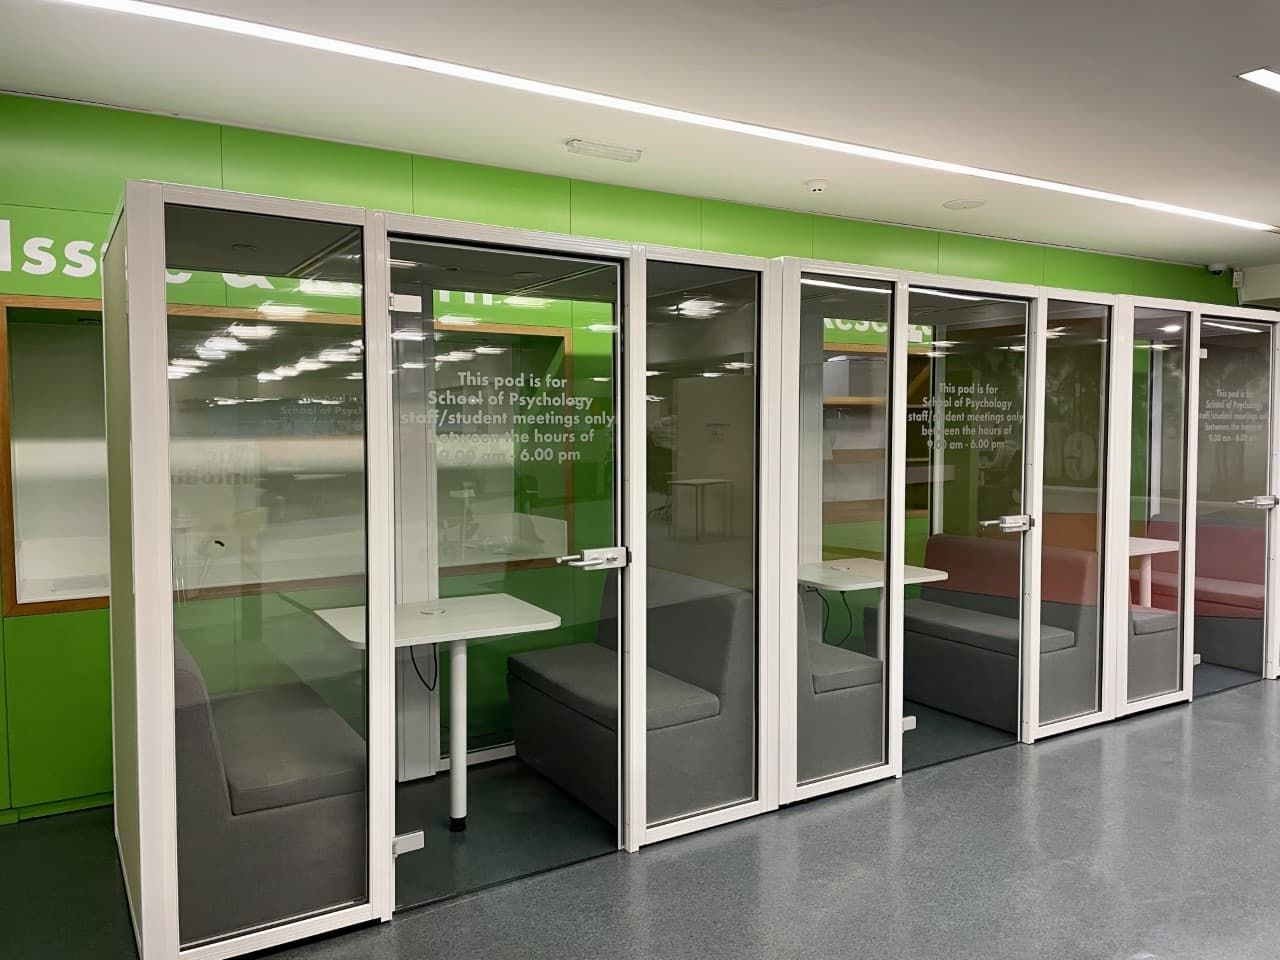 Soundproof booths available in the School of Psychology which can be used for staff and student meetings, as well as conducting experiments.